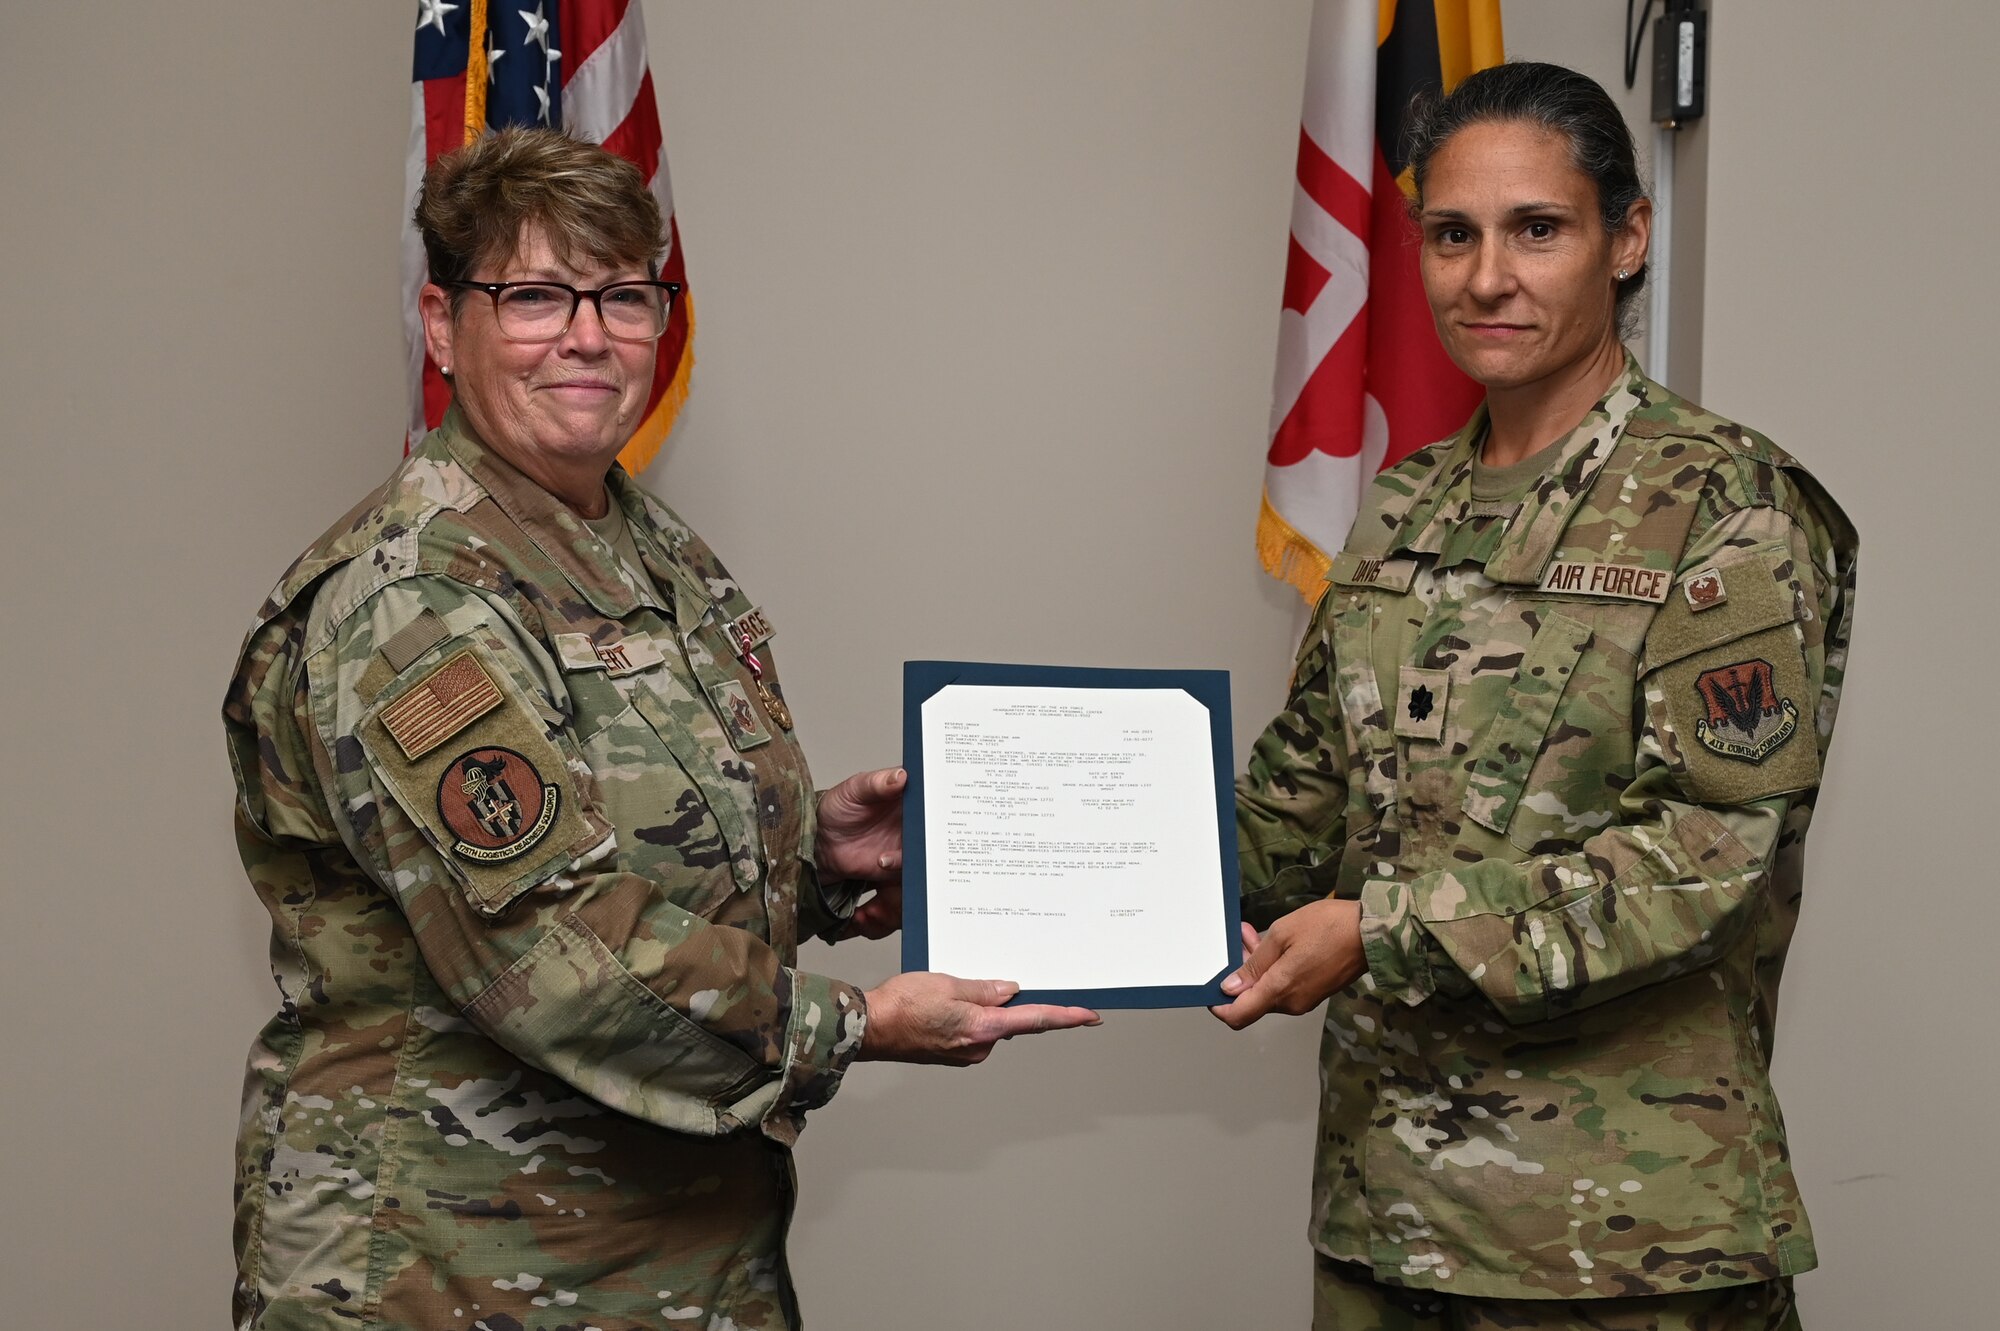 U.S Air Force Senior Master Sgt. Jacqueline A. Talbert, avionics superintendent of the 175th Maintenance Squadron, receives a retirement order from U.S. Air Force Lt. Col. Aliysa Davis, Maryland National Guard Joint Force Headquarters A5/7 director, at Martin State Air National Guard Base, Middle River, Maryland, on Aug. 12, 2023.